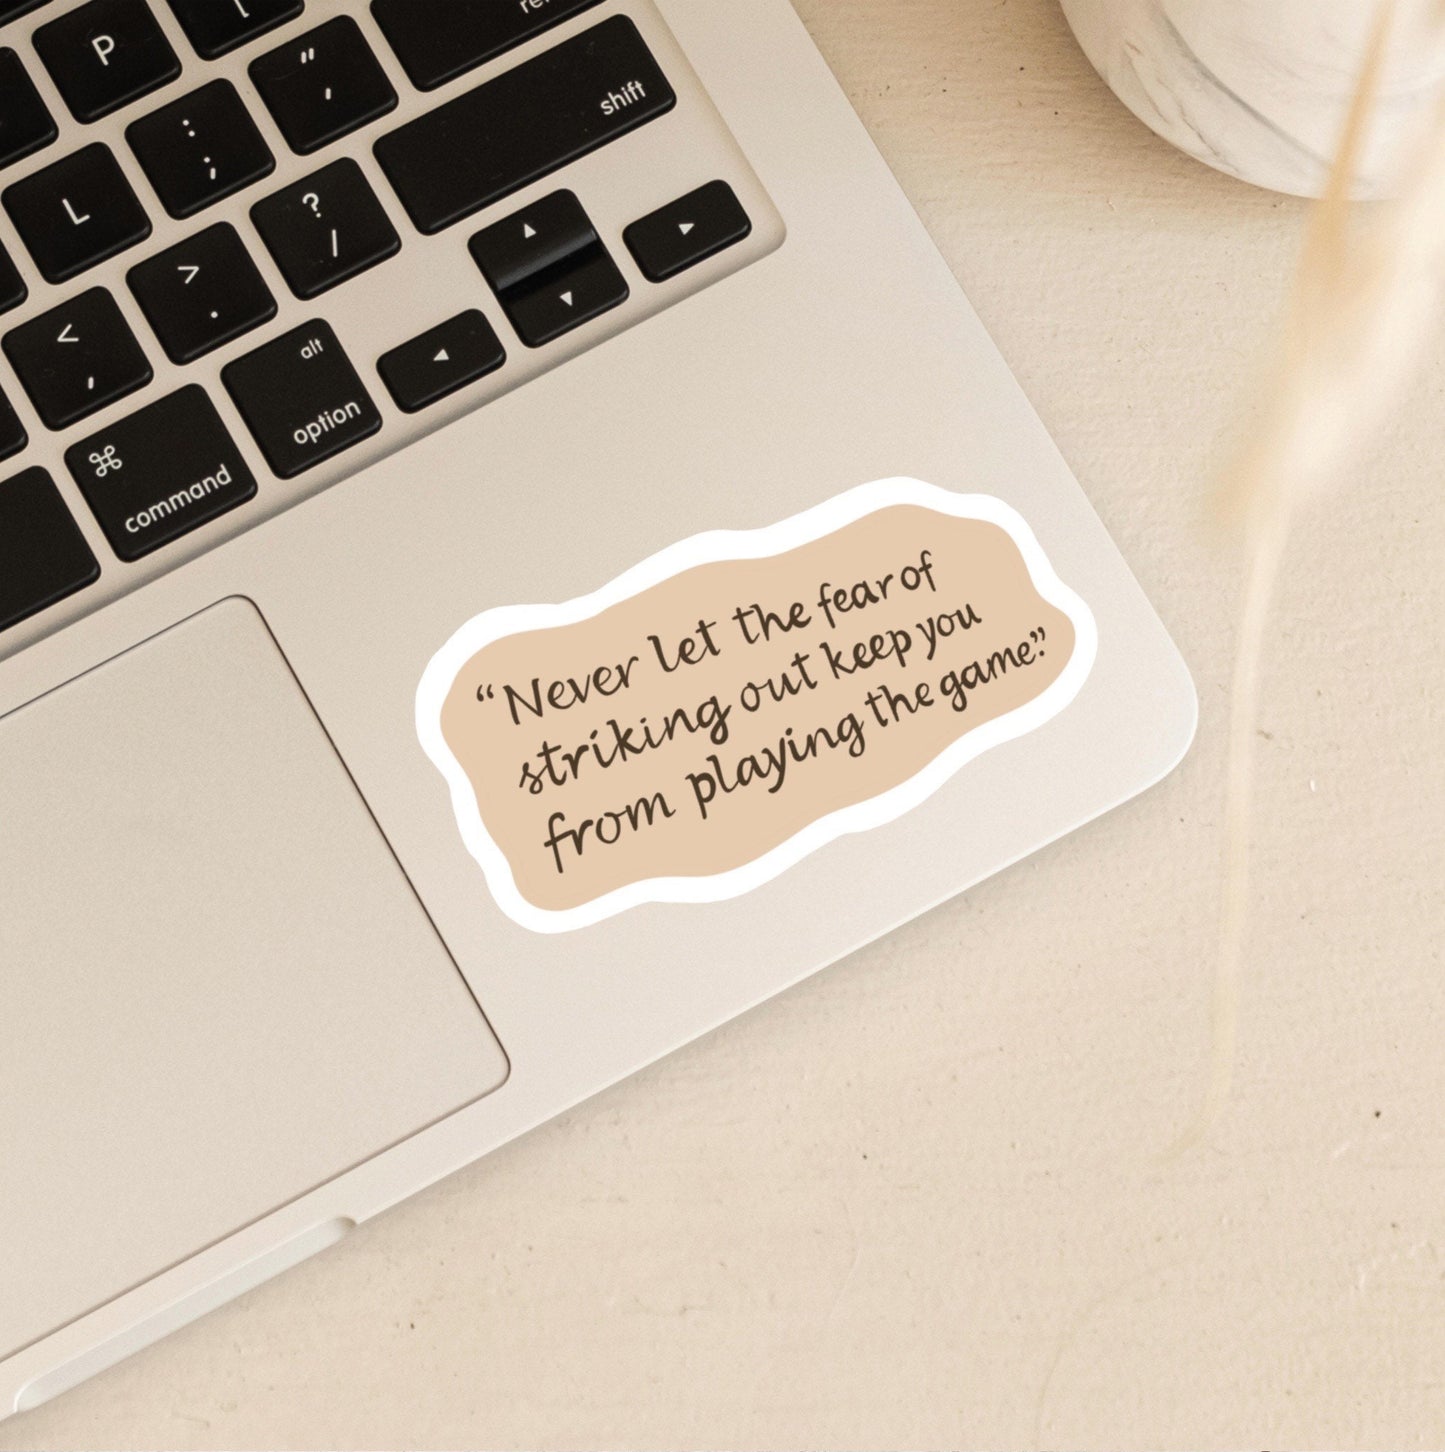 Never let the fear of striking out keep you from playing the game… | A Cinderella Story Stickers